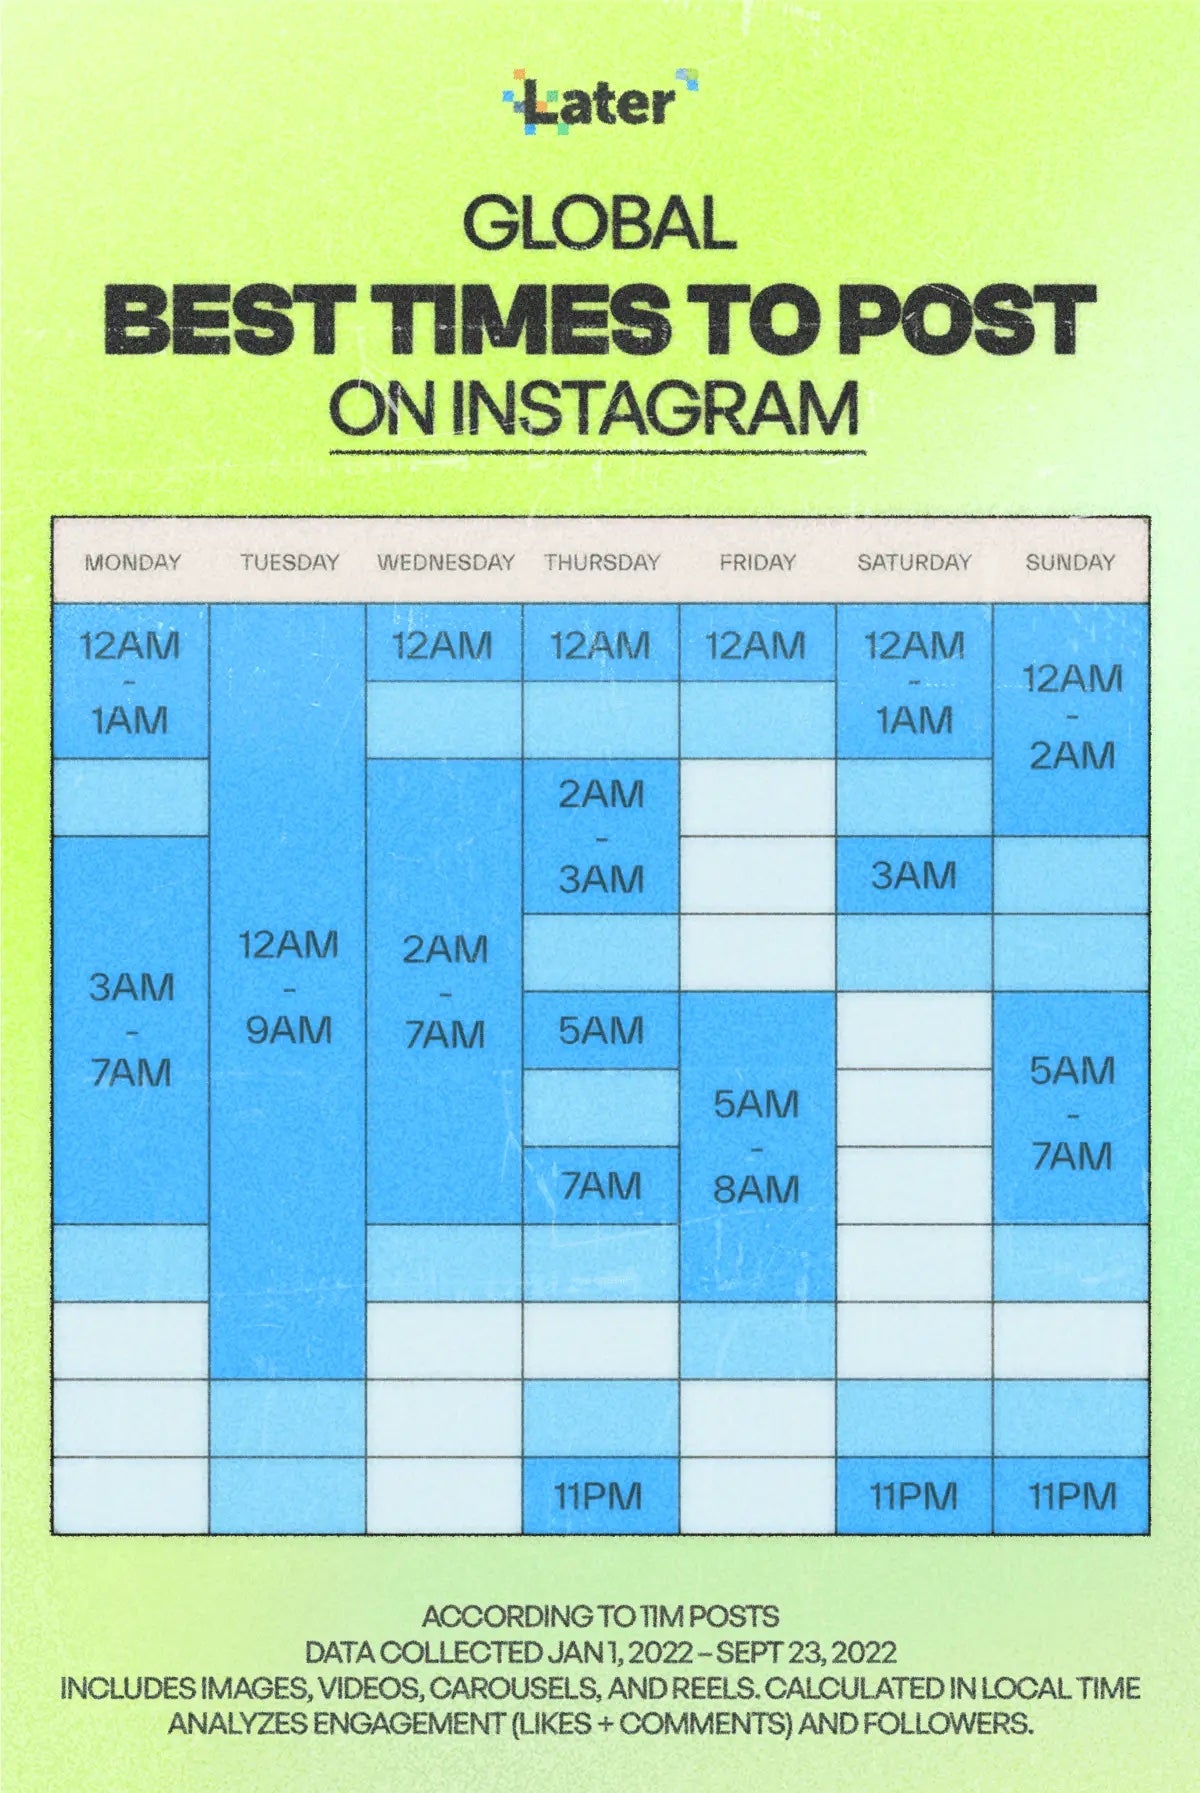 Best global times to post on Instagram according to Later